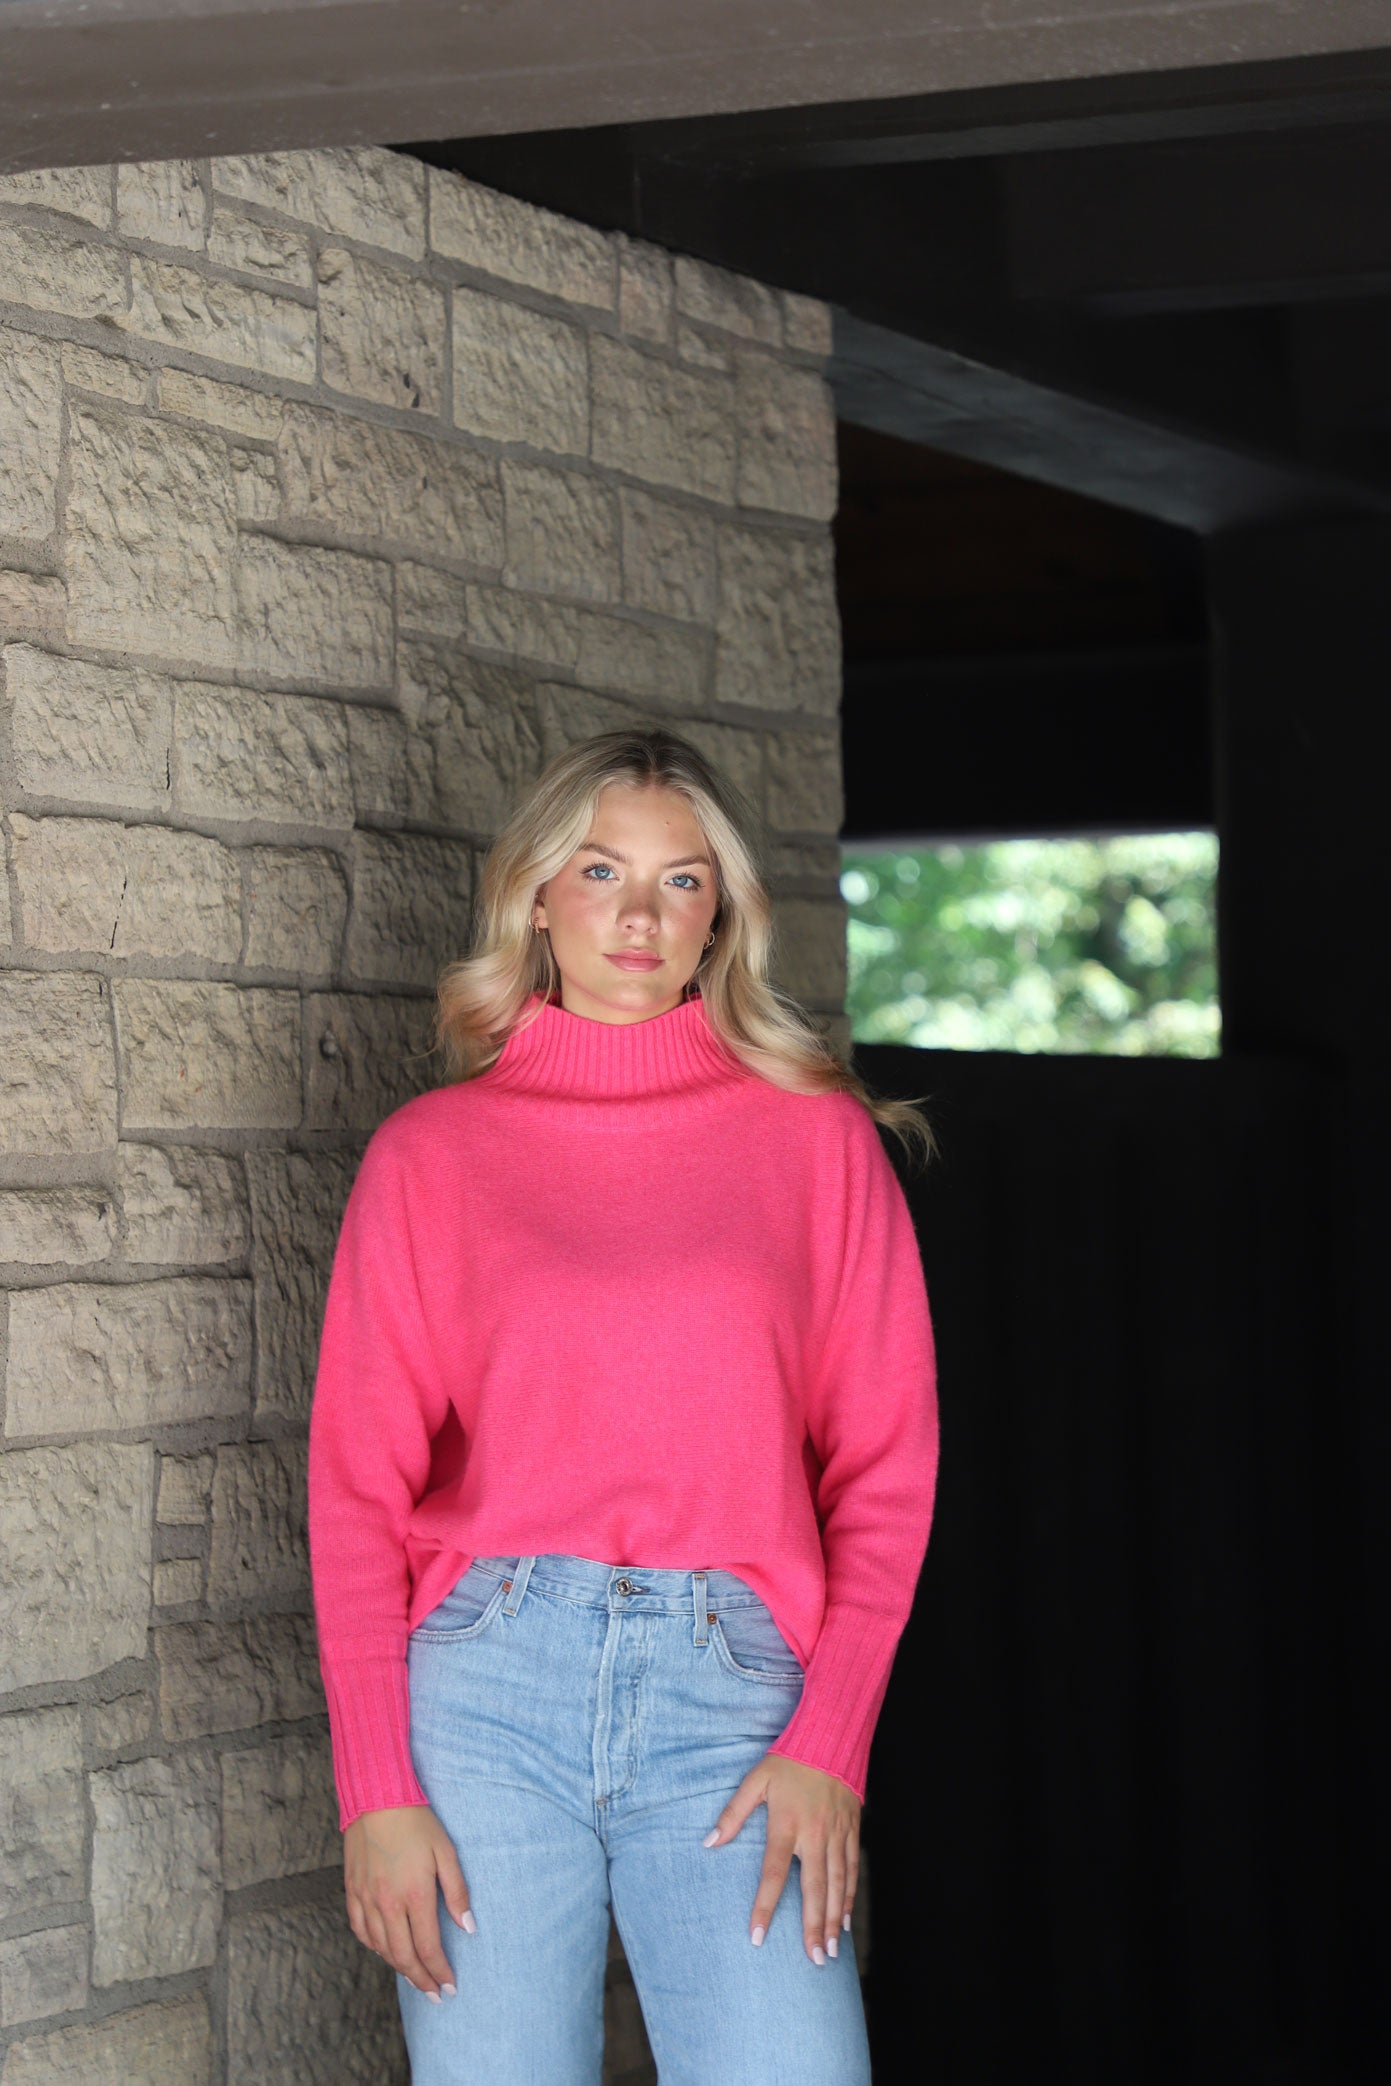 Cashmere Dolman Stand Neck Sweater in Bright Rose